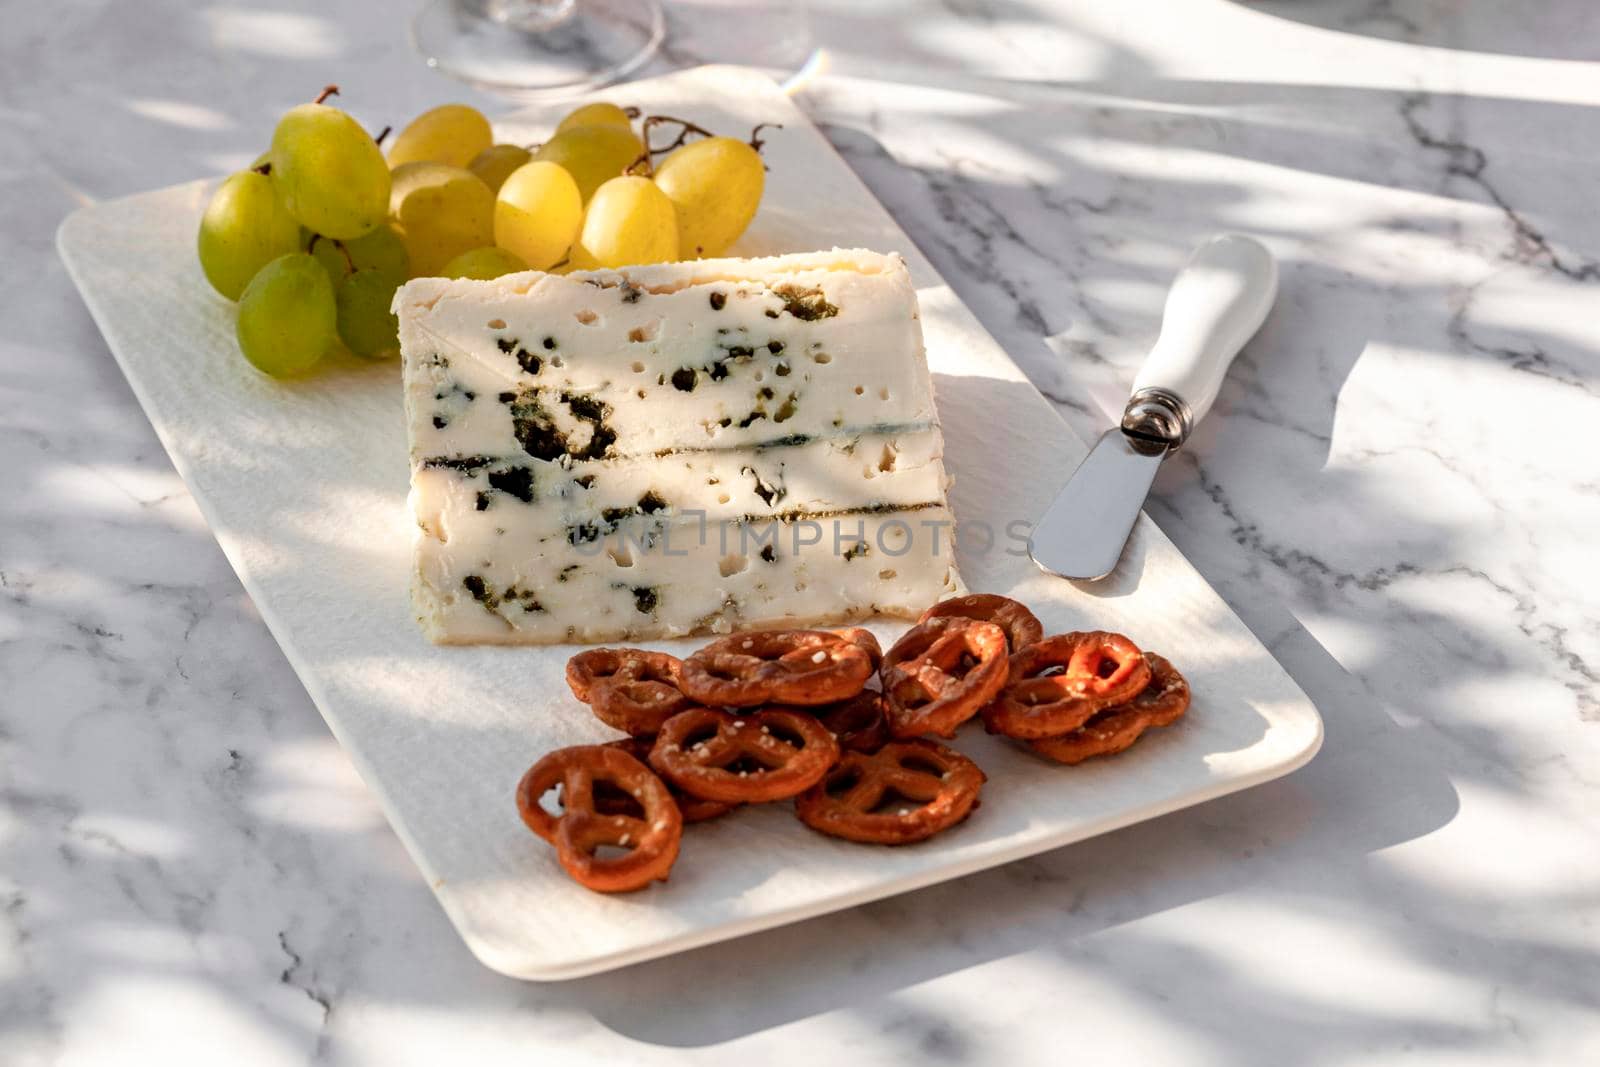 gorgonzola cheese served with green grapes and snacks outdoors, hard light